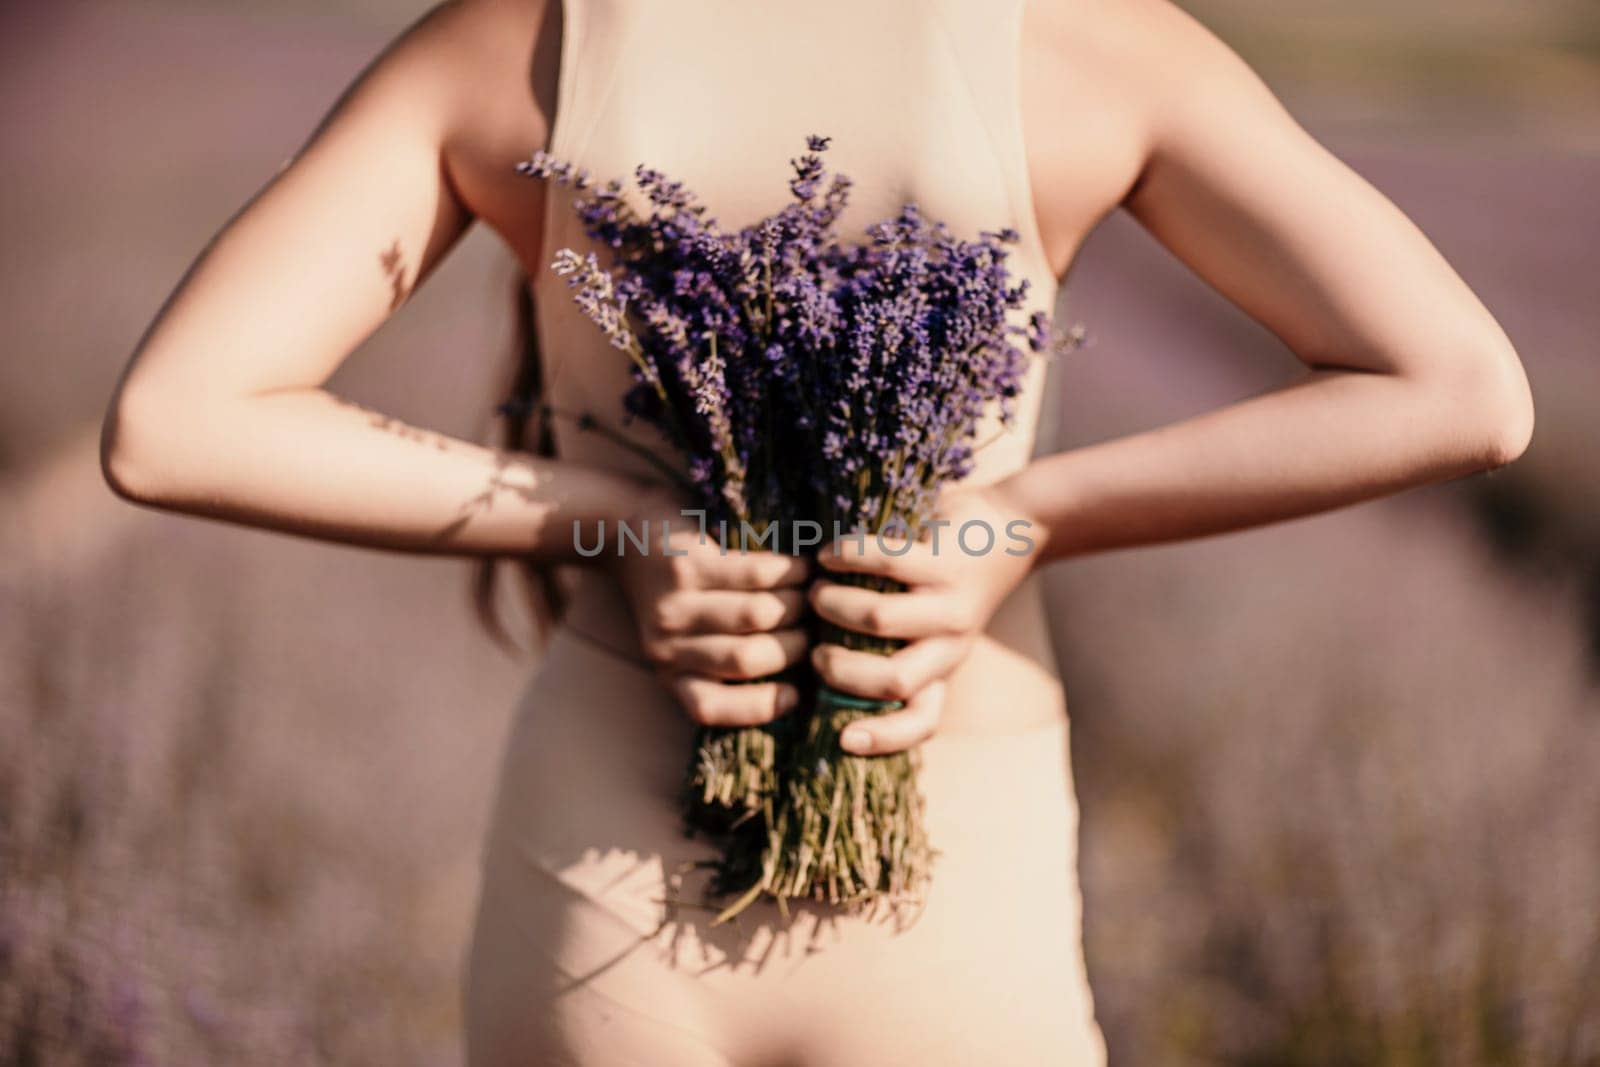 girl holding bouquet lavender flowers. The flowers are purple and the woman is wearing a tan top. Concept of calm and relaxation, as lavender is often associated with these feelings